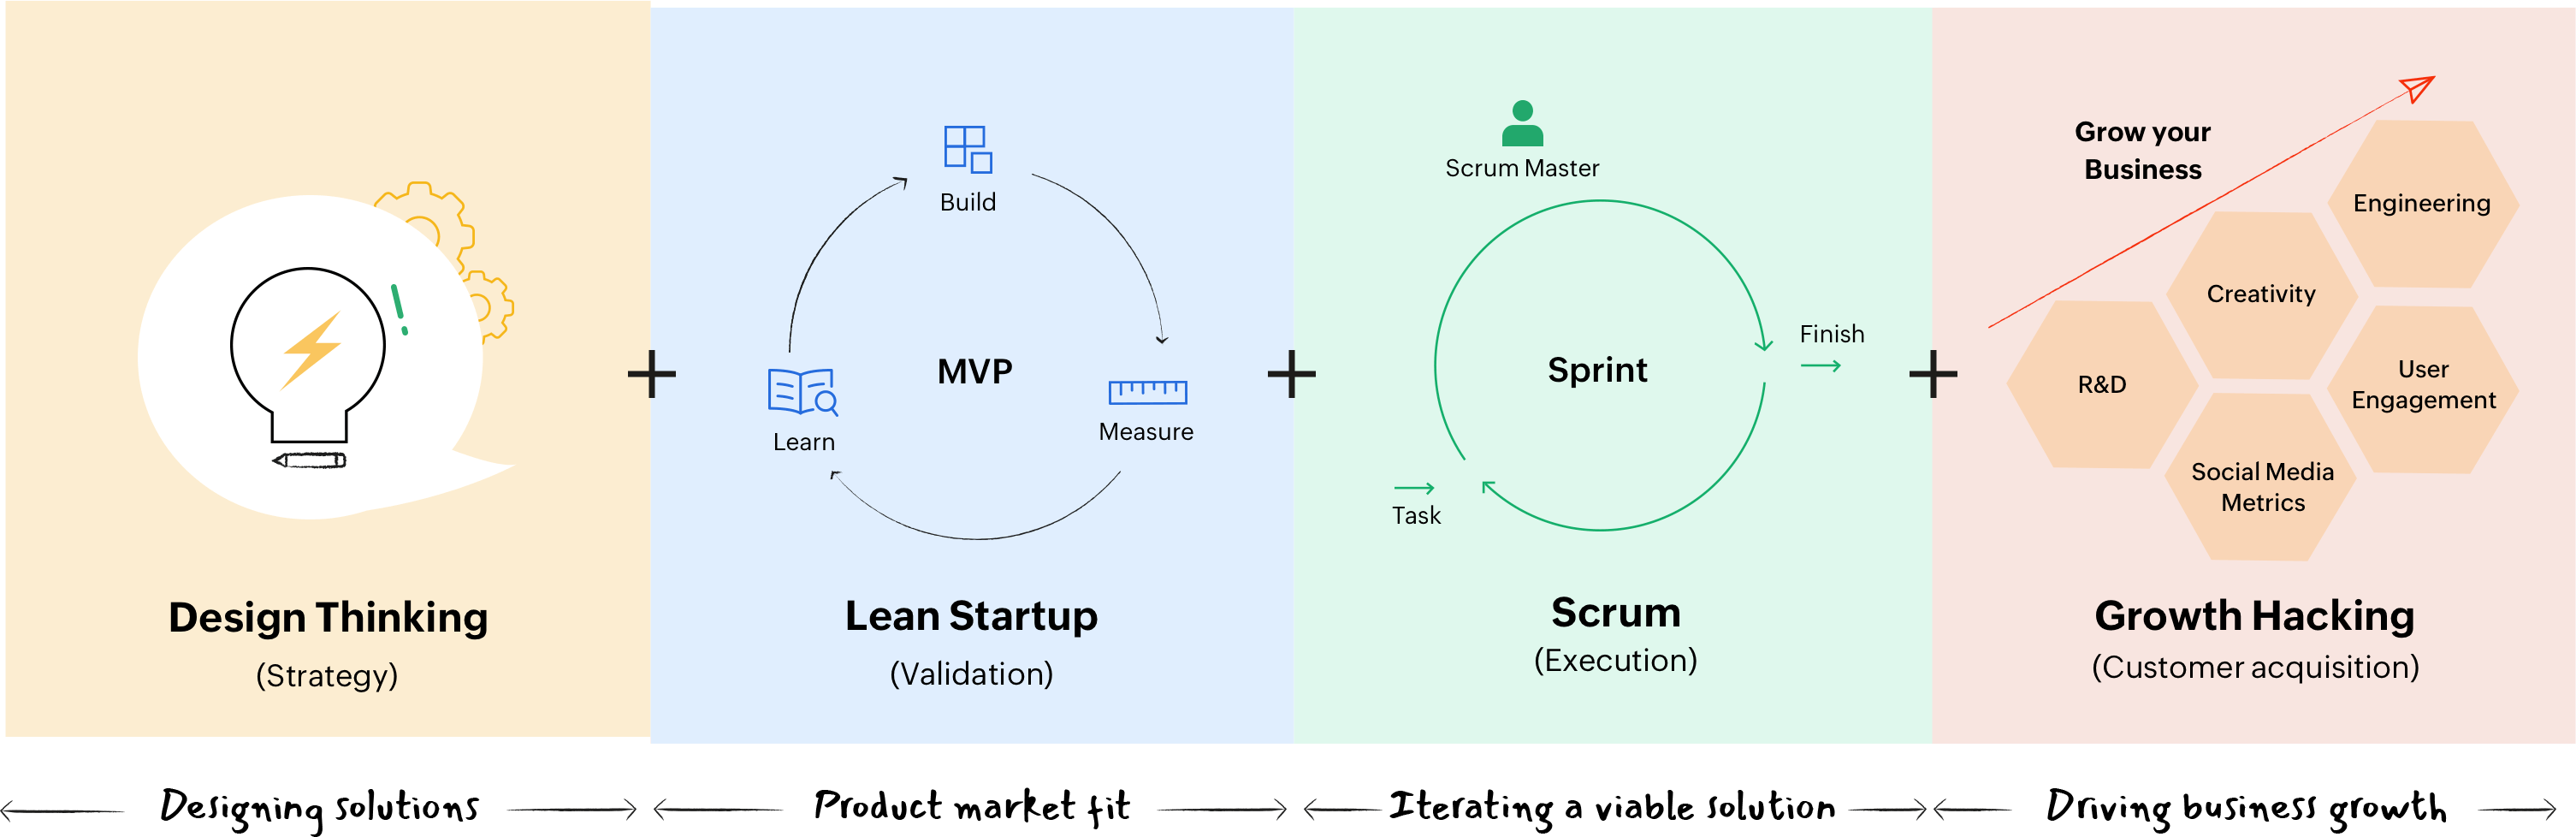 Design thinking + Lean startup + Agility + Growth hacking